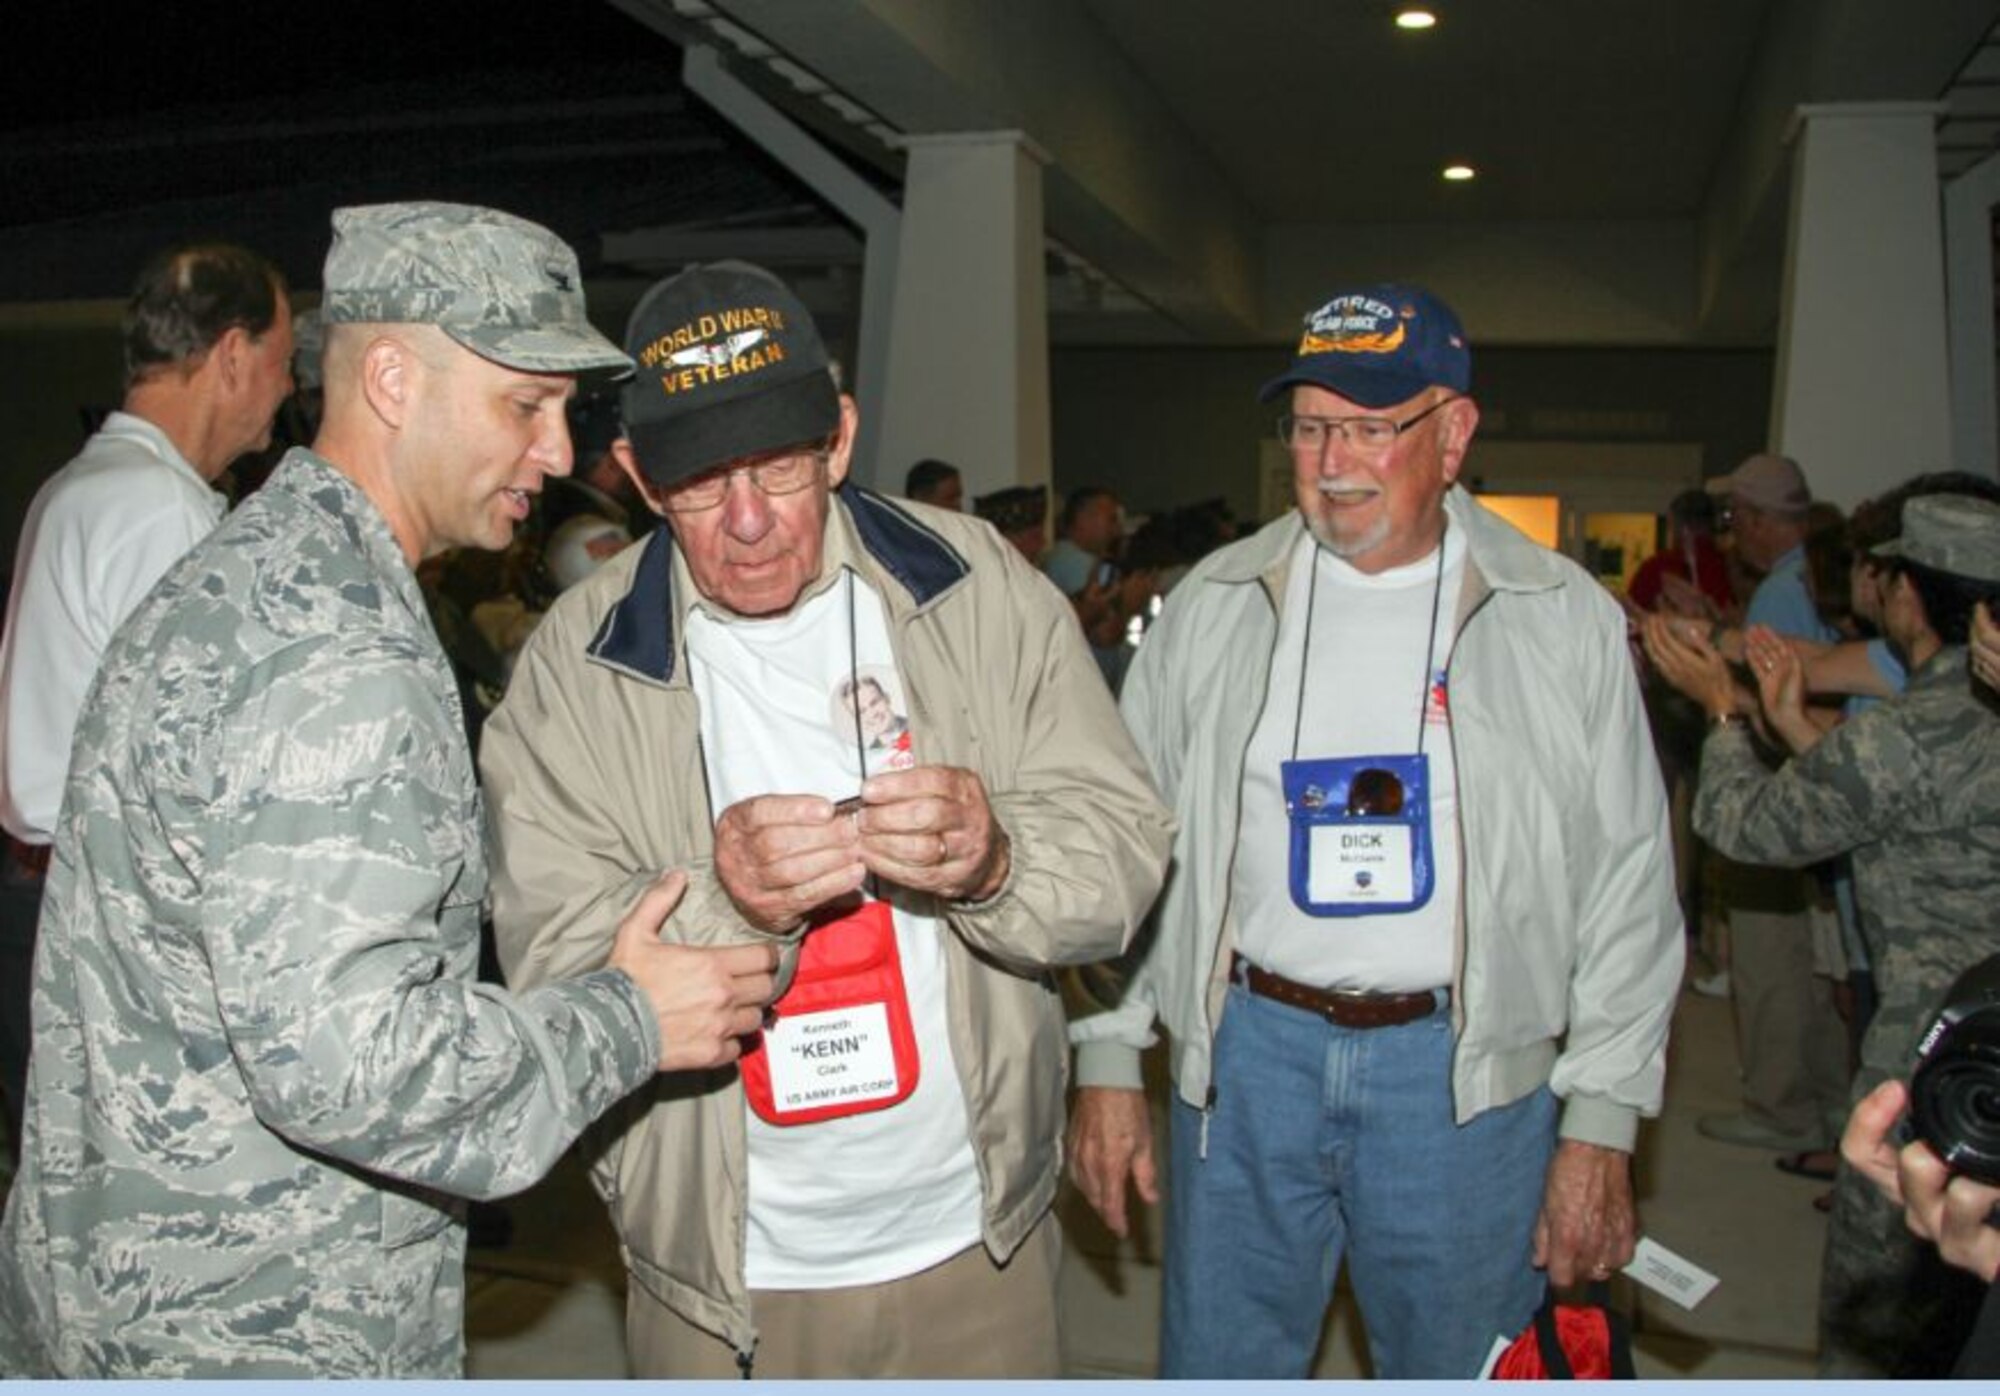 Col. Robert Pavelko, 45th Space Wing vice commander, gives an Honor Flight coin to retired U.S. Army Air Corps 1st Lt. Kenneth Clark, at the Honor Flight departure in Melbourne, Fla. April 12. Team Patrick-Cape volunteers were in attendance and met with World War II and Korean War veterans prior to flying to Washington D.C. to tour the U.S. Air Force Memorial, war memorials, and Arlington Cemetery, as part of the Honor Flight program. (Courtesy photo/Lou Seiler Jr.) 